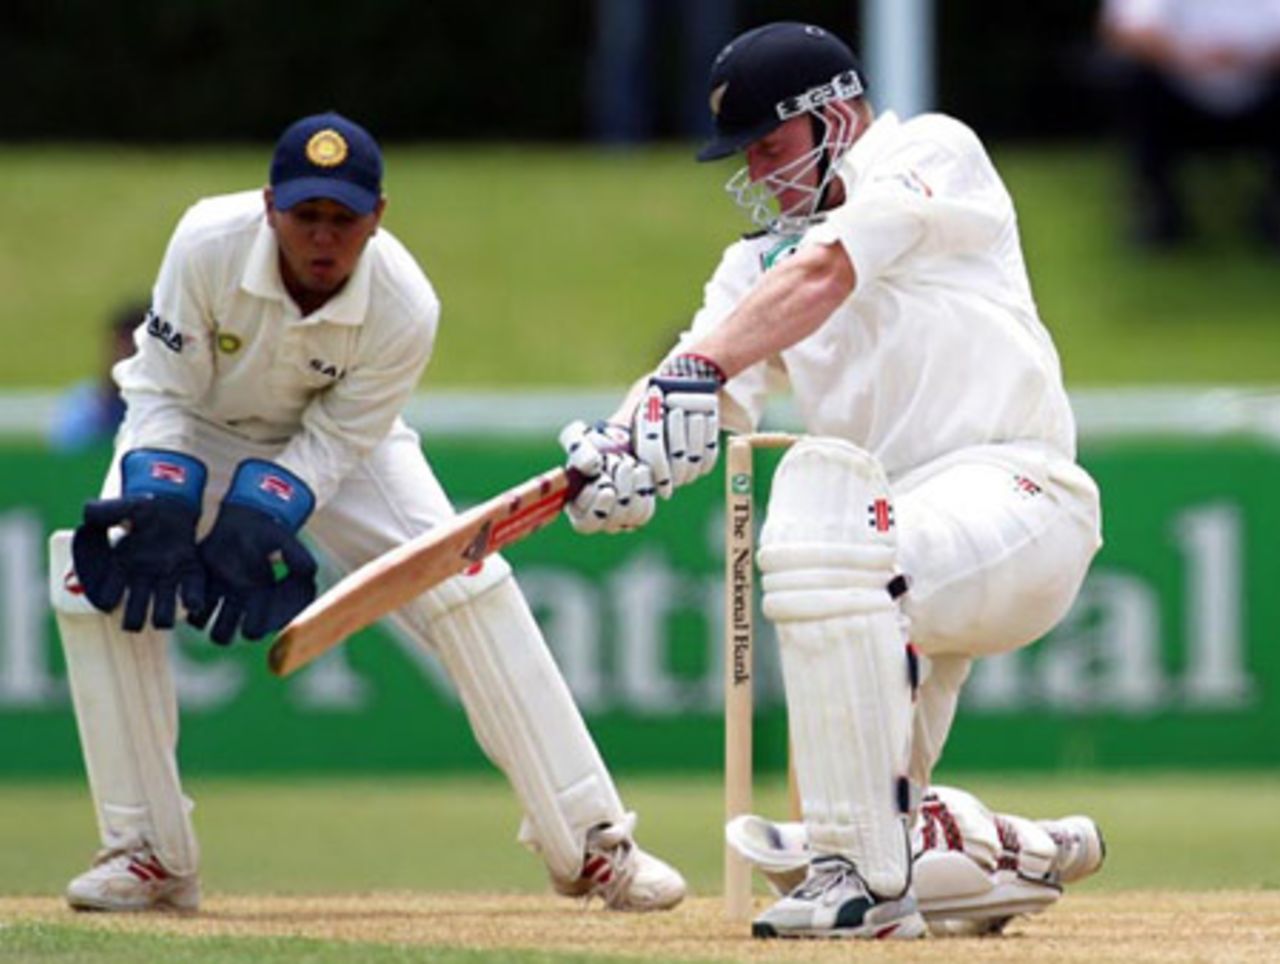 New Zealand batsman Scott Styris square drives a delivery from Indian bowler Harbhajan Singh during his second innings of 17 as wicket-keeper Parthiv Patel looks on. 2nd Test: New Zealand v India at Westpac Park, Hamilton, 19-23 December 2002 (22 December 2002).